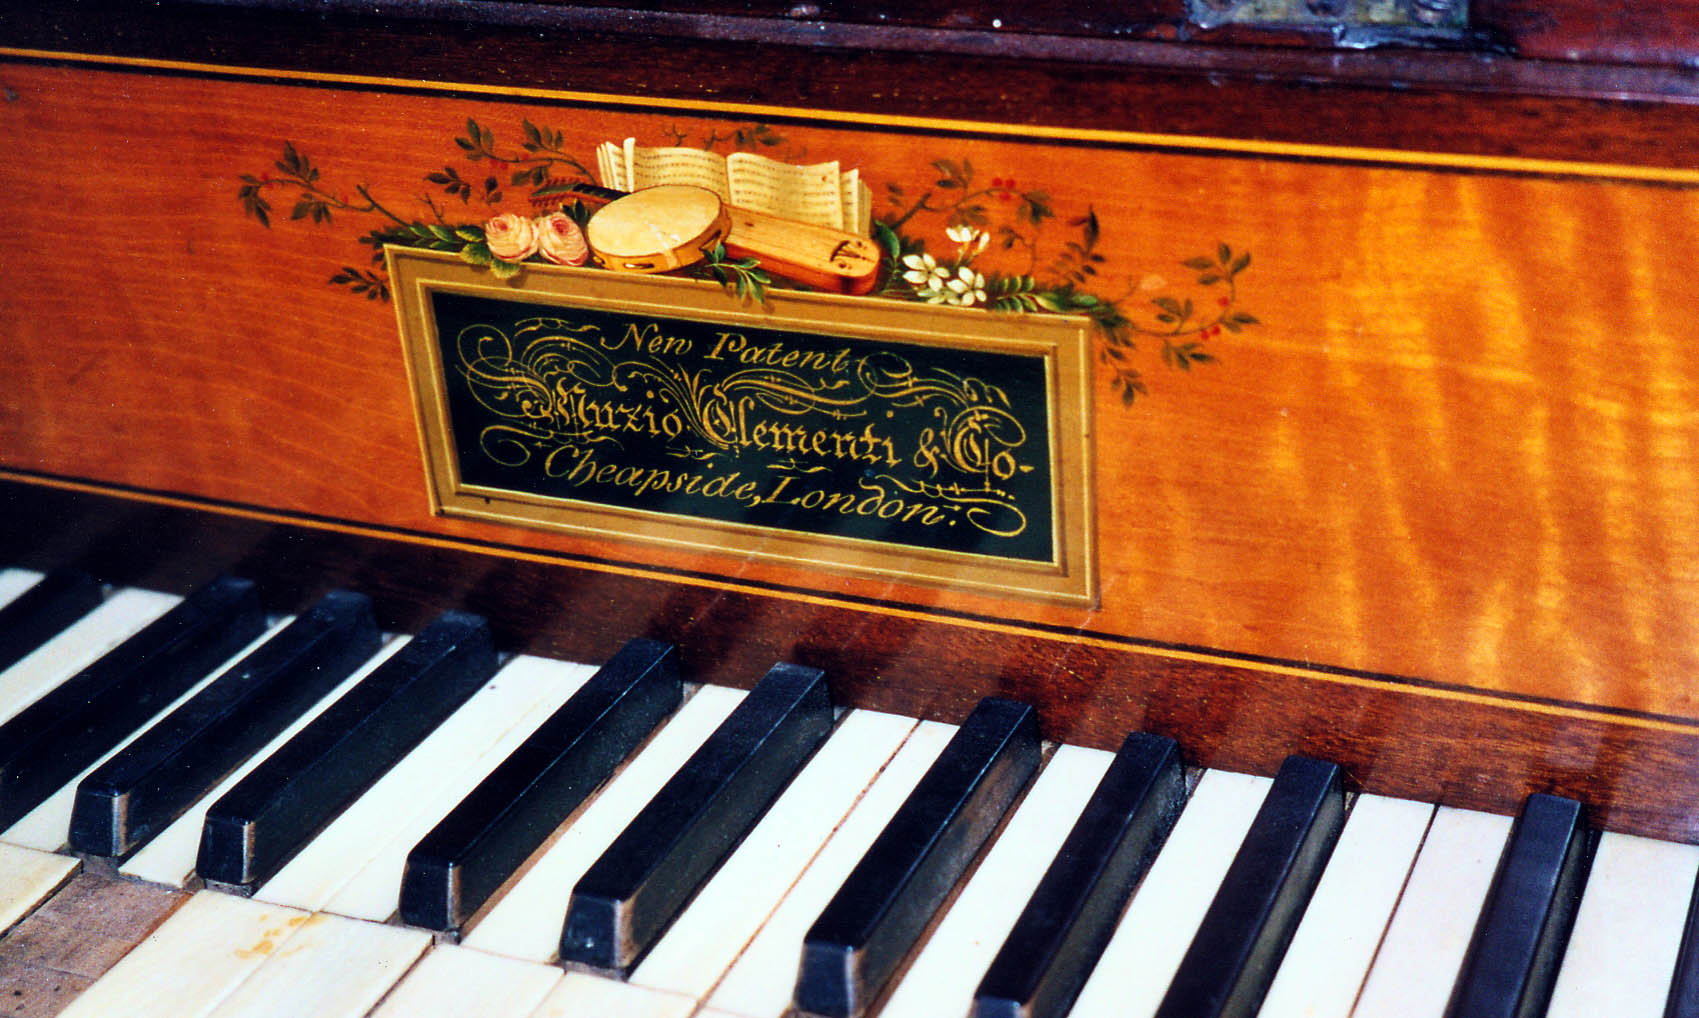 To Clementi pianos